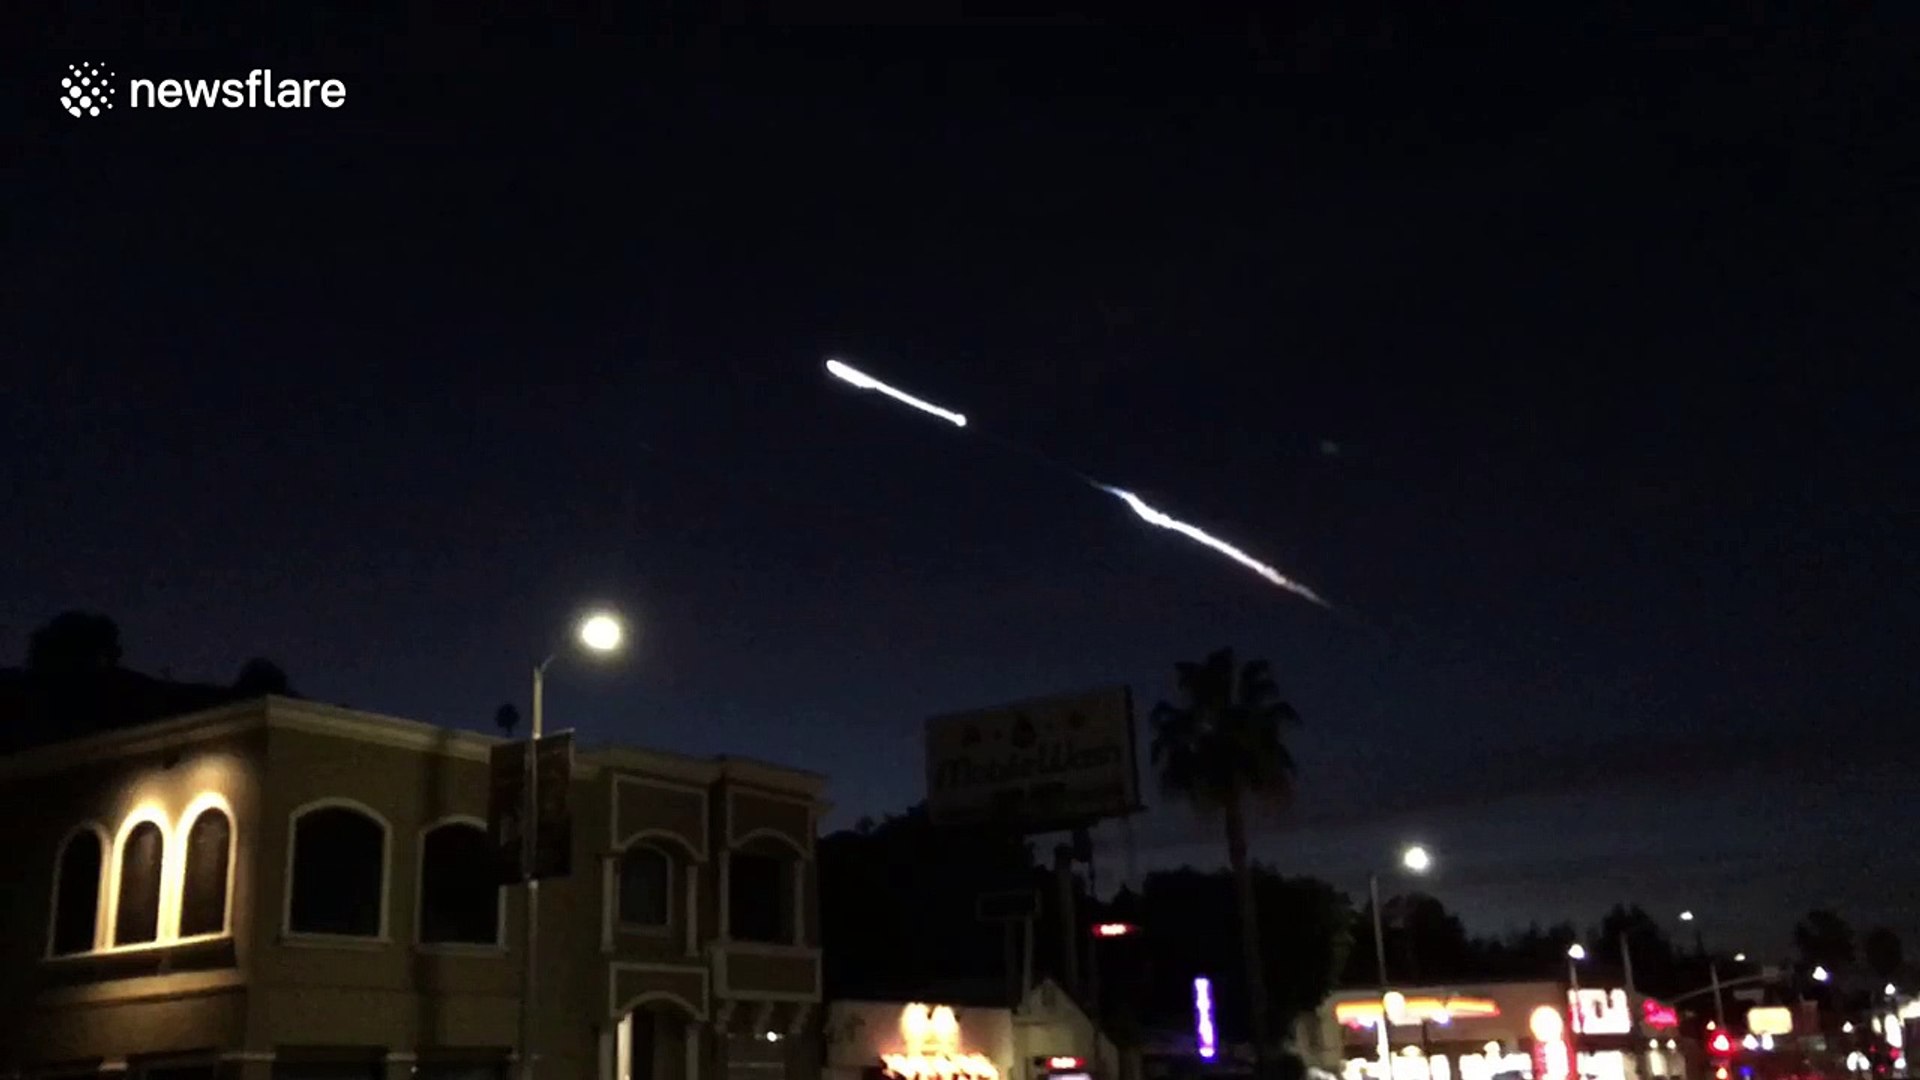 Los Angeles resident films SpaceX rocket launch